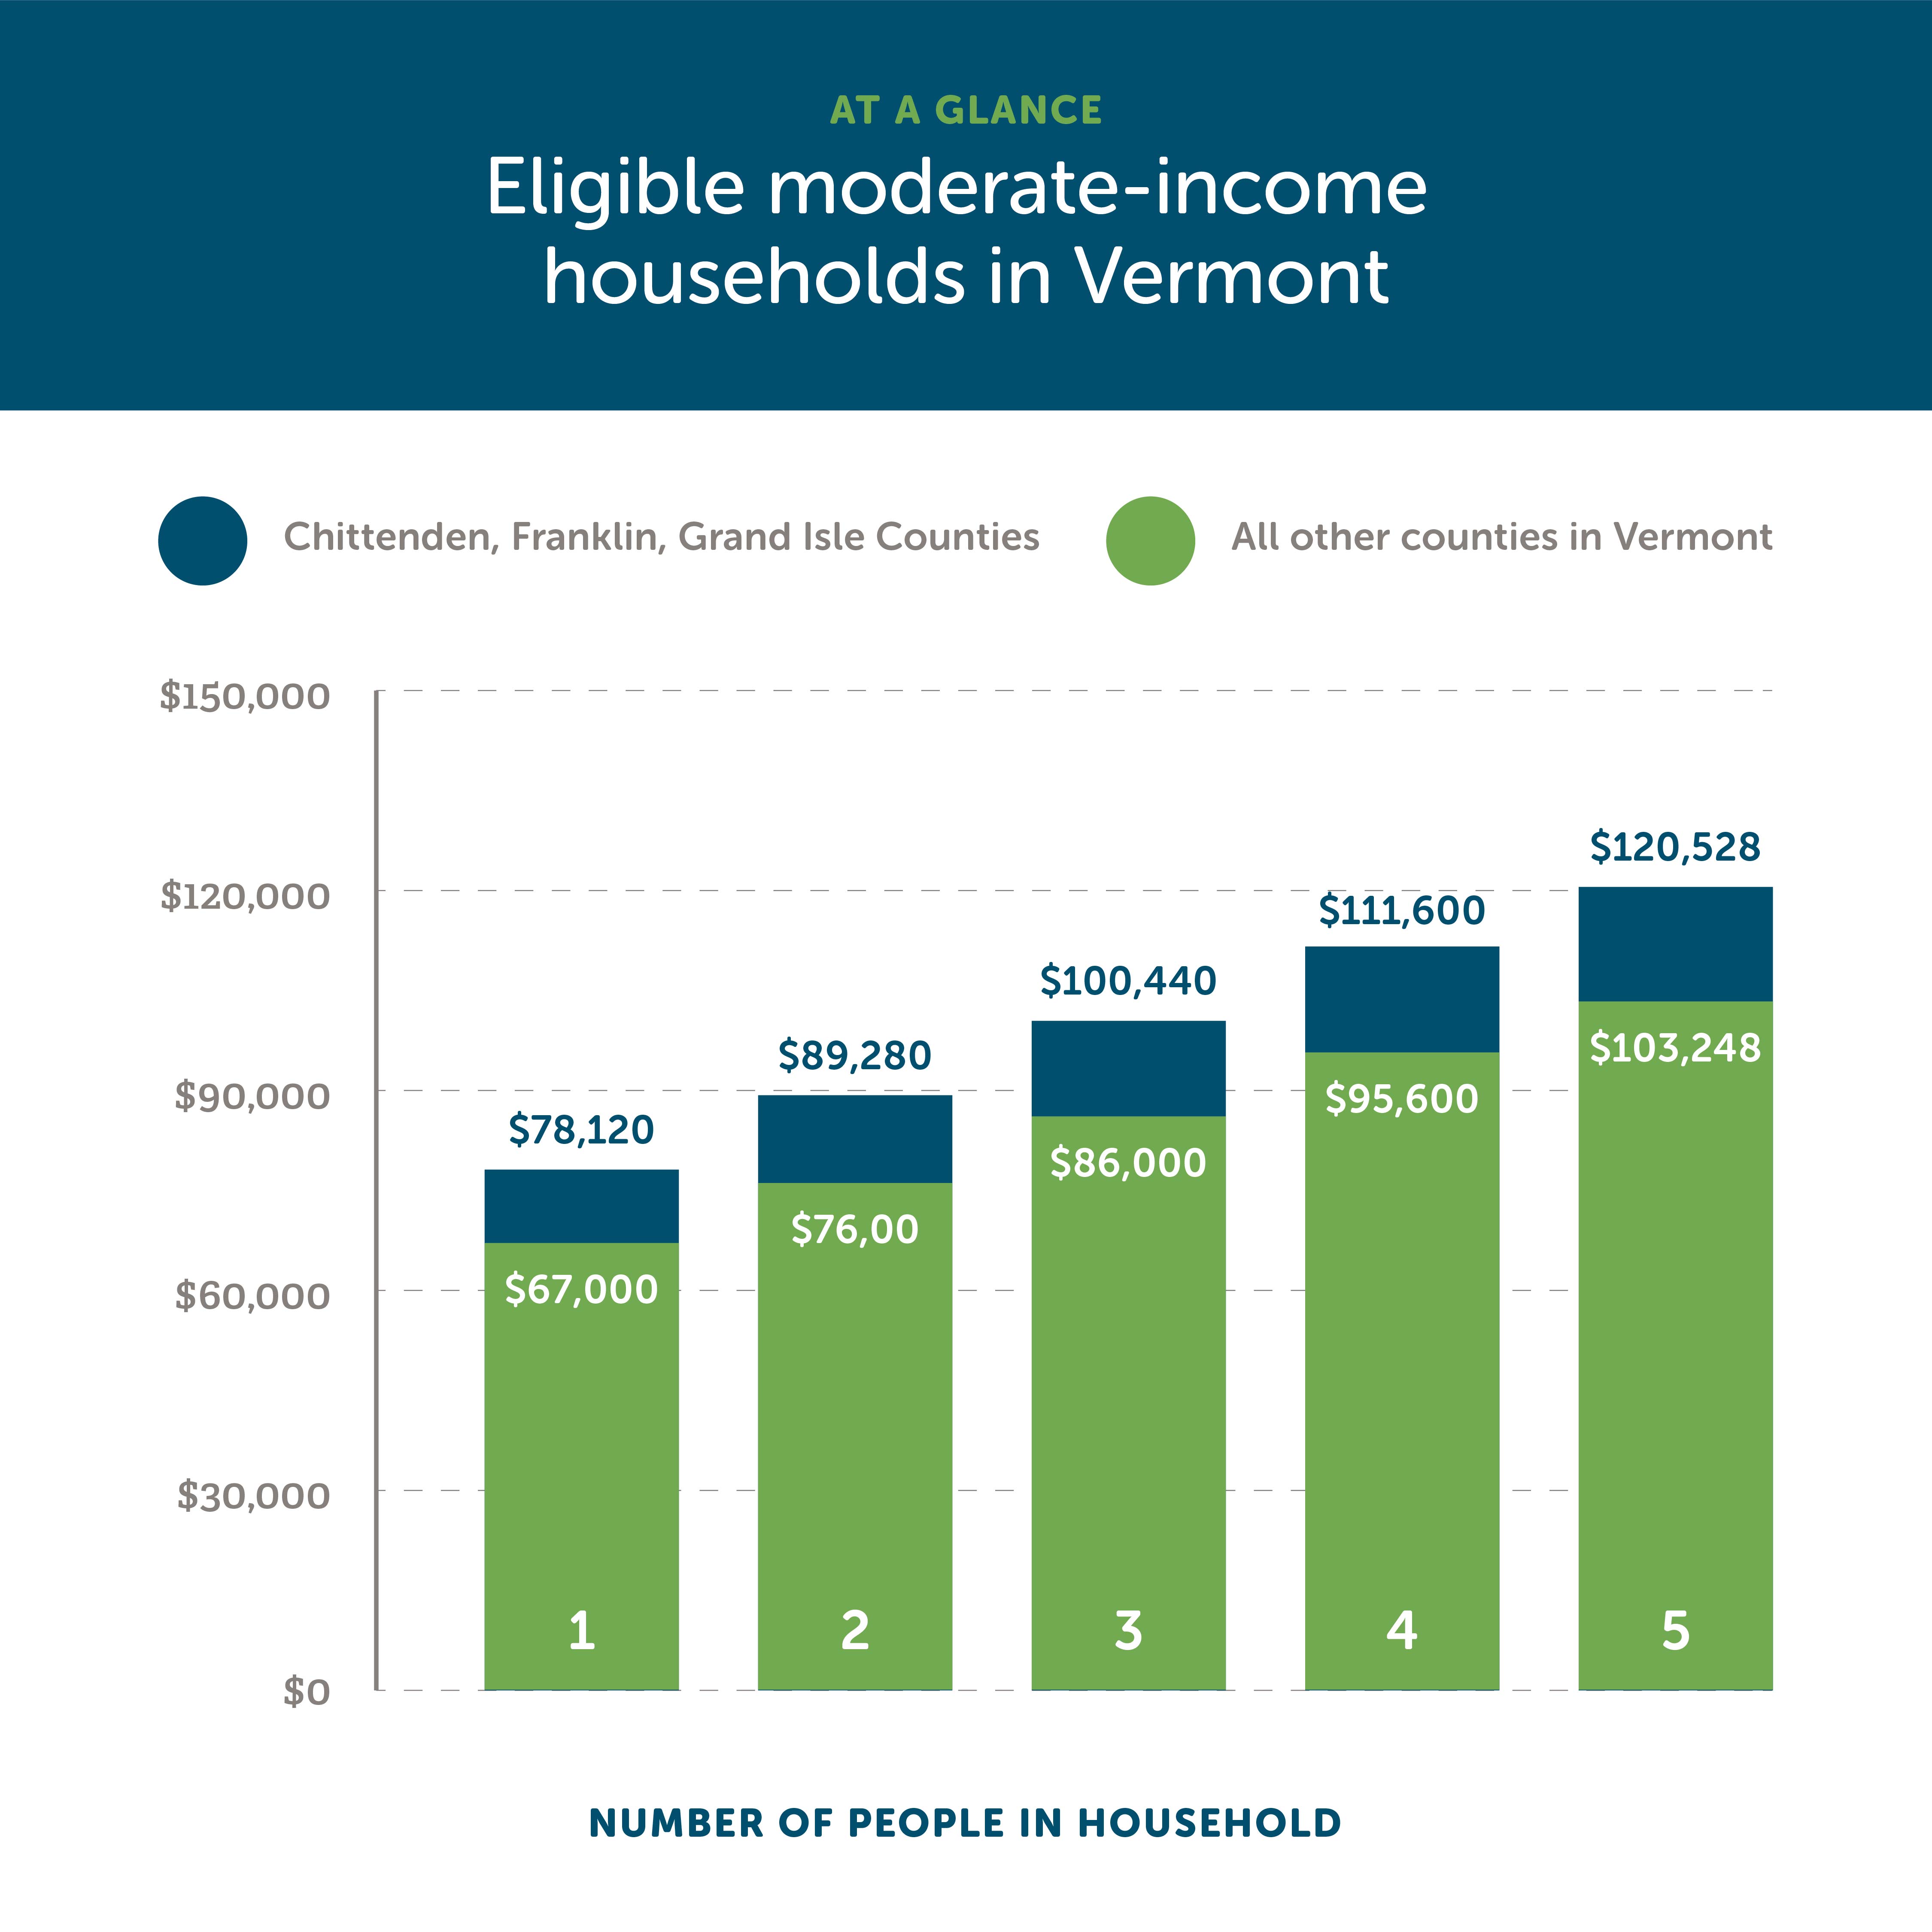 A graph showing eligible moderate-income household incomes in Vermont